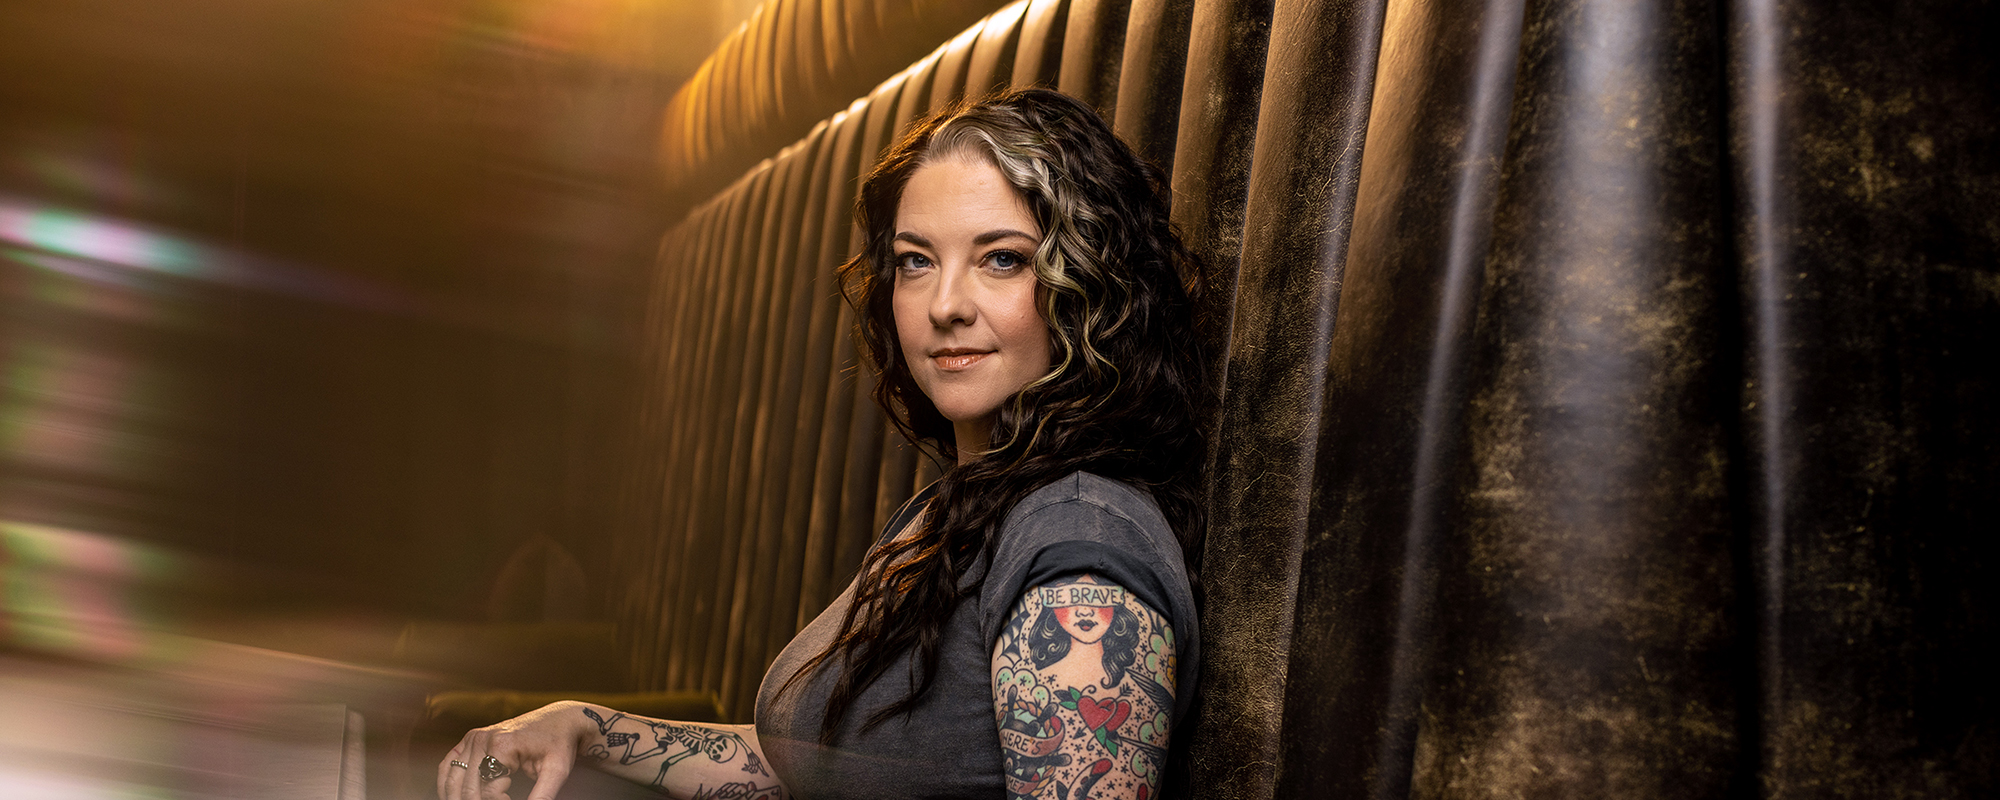 Ashley McBryde Releases Heartwarming Music Video for “Light On In the Kitchen”